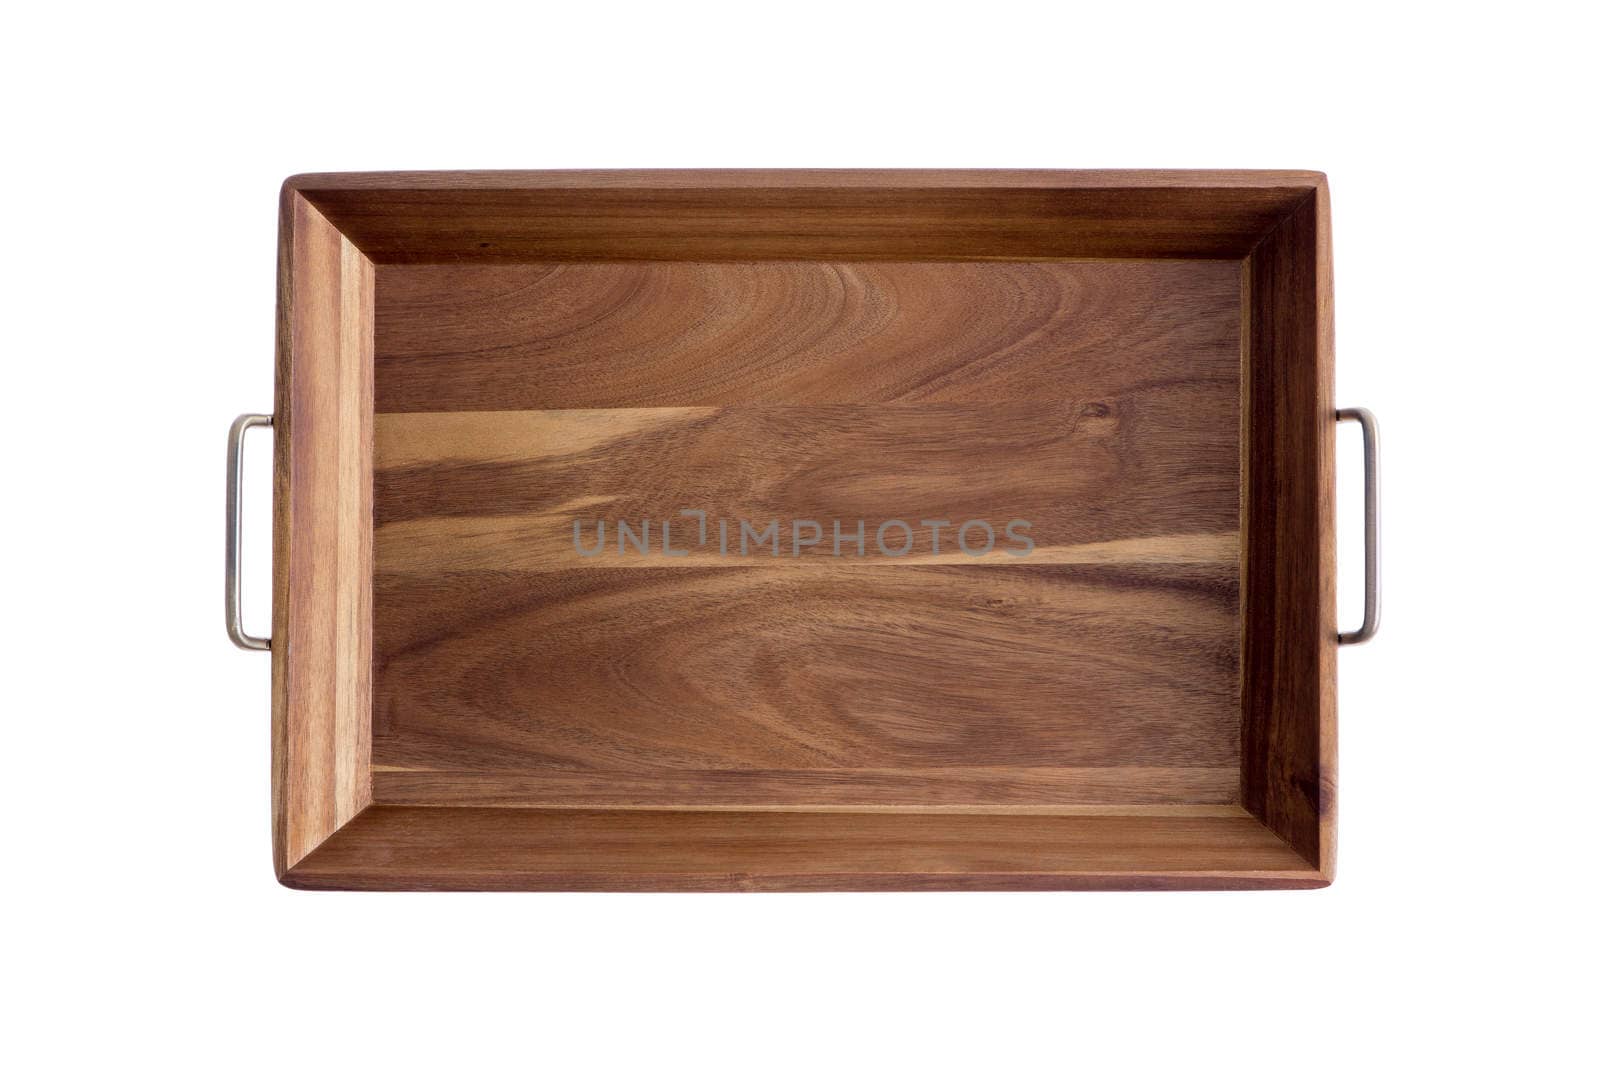 Decorative rectangular olive wood tray showing the light and dark pattern of the grain with brass handles, overhead view isolated on white